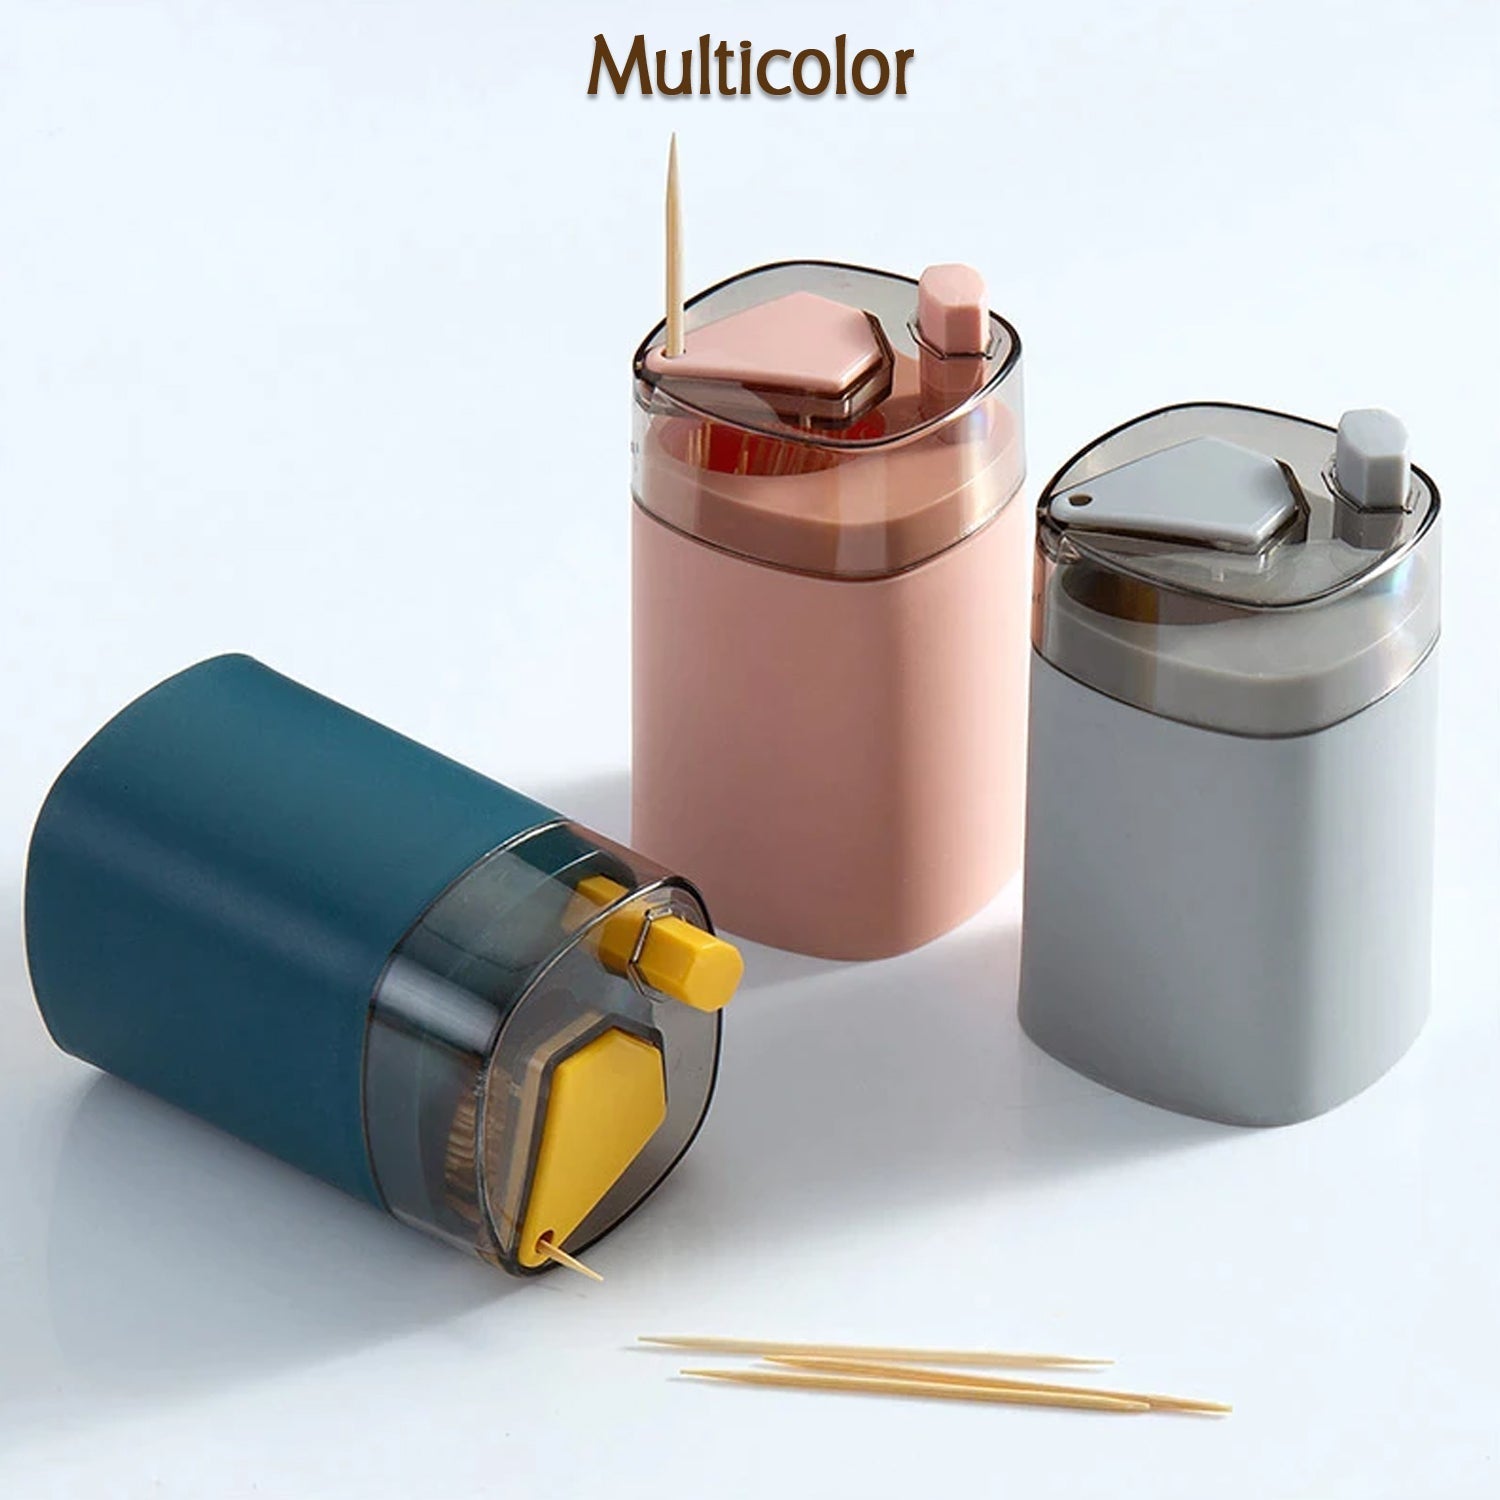 4005L Toothpick Holder Dispenser, Pop-Up Automatic Toothpick Dispenser for Kitchen Restaurant Thickening Toothpicks Container Pocket Novelty, Safe Container Toothpick Storage Box.